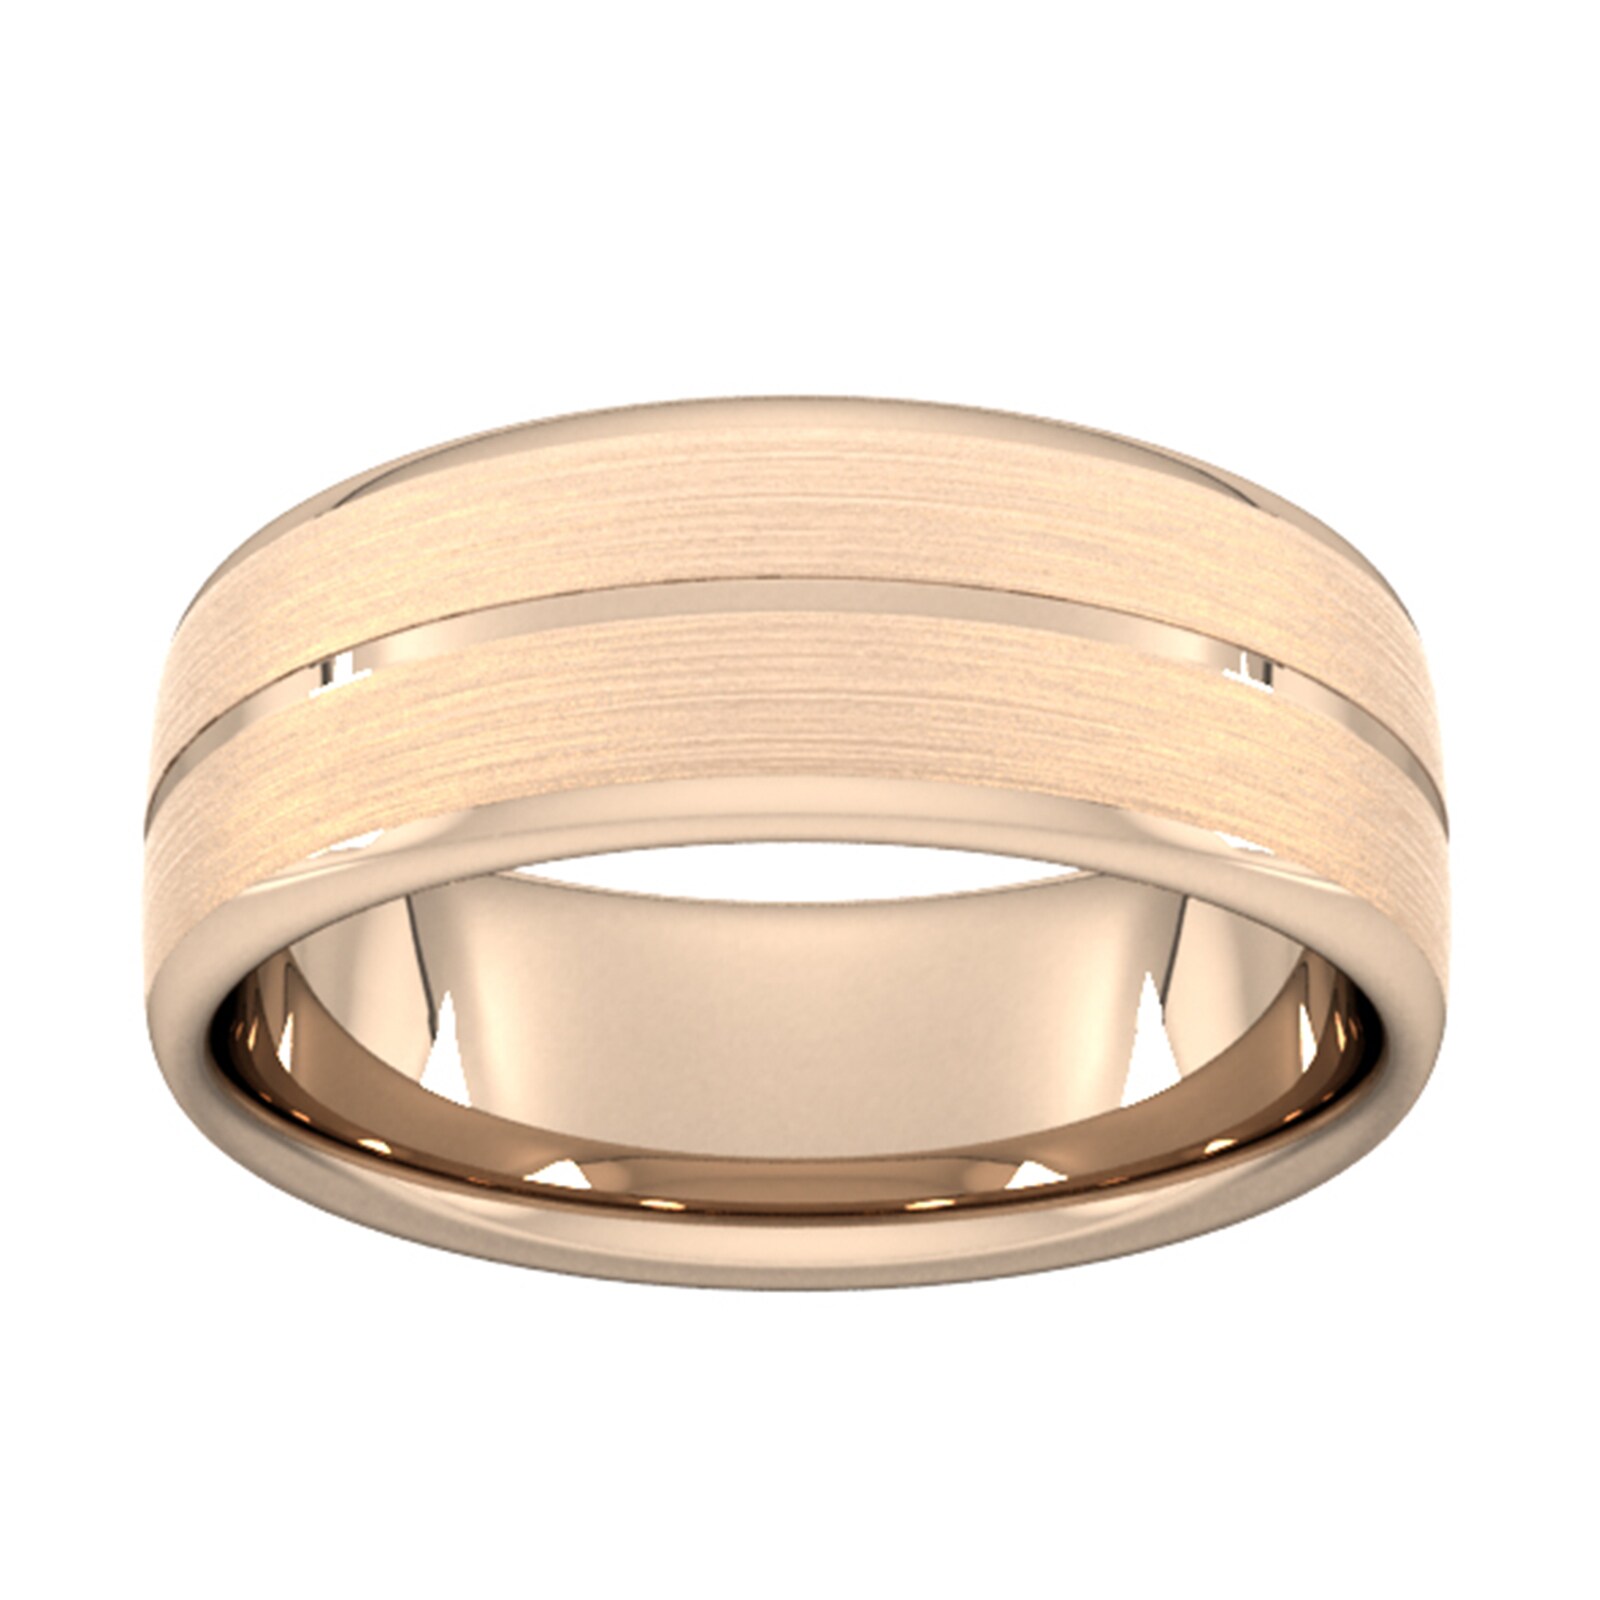 8mm Flat Court Heavy Centre Groove With Chamfered Edge Wedding Ring In 18 Carat Rose Gold - Ring Size T